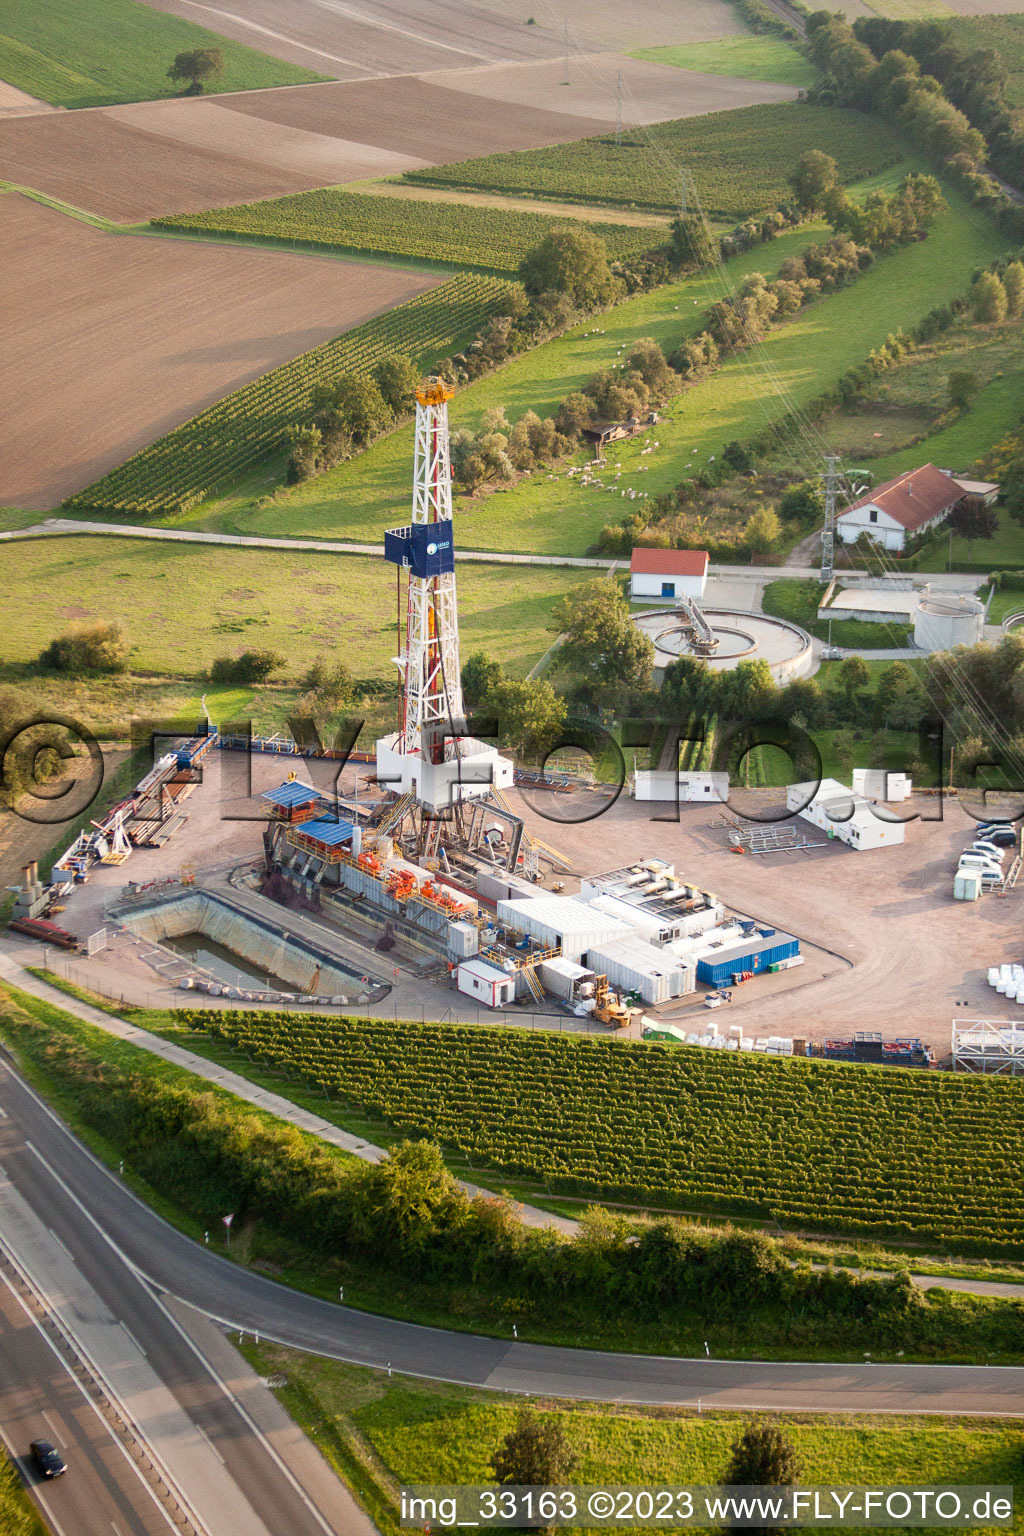 Geothermal system on the A65, 2nd borehole in Insheim in the state Rhineland-Palatinate, Germany seen from above